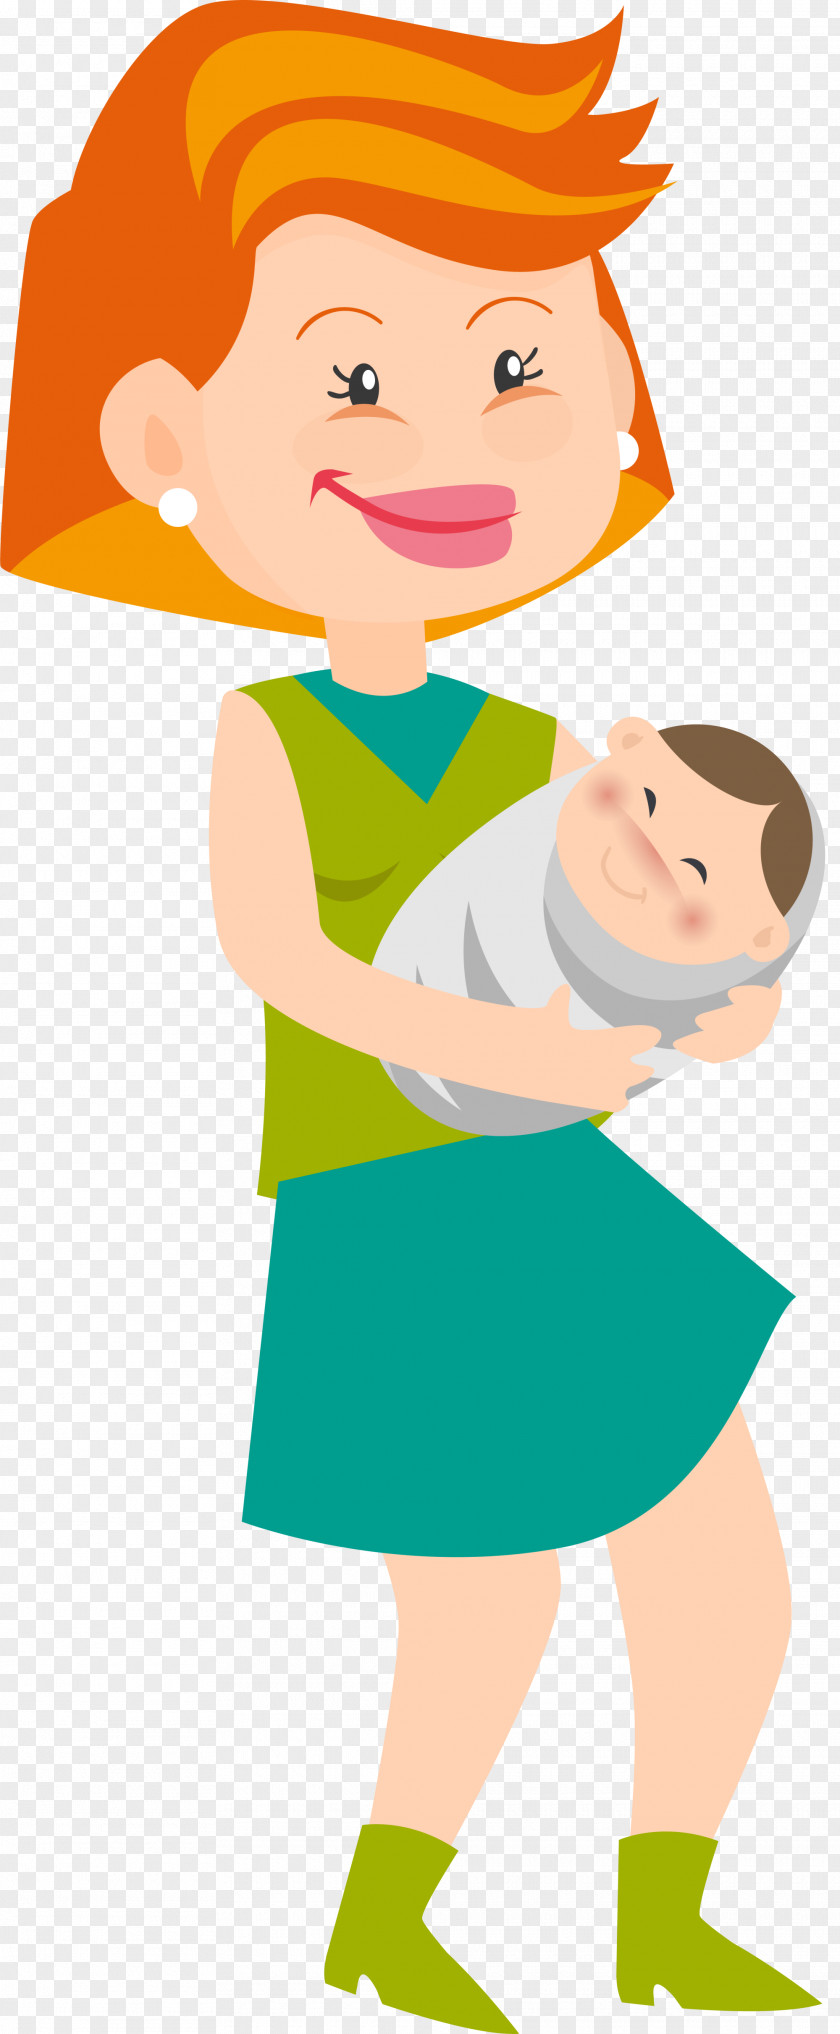 Green Cartoon Woman Family Child Illustration PNG